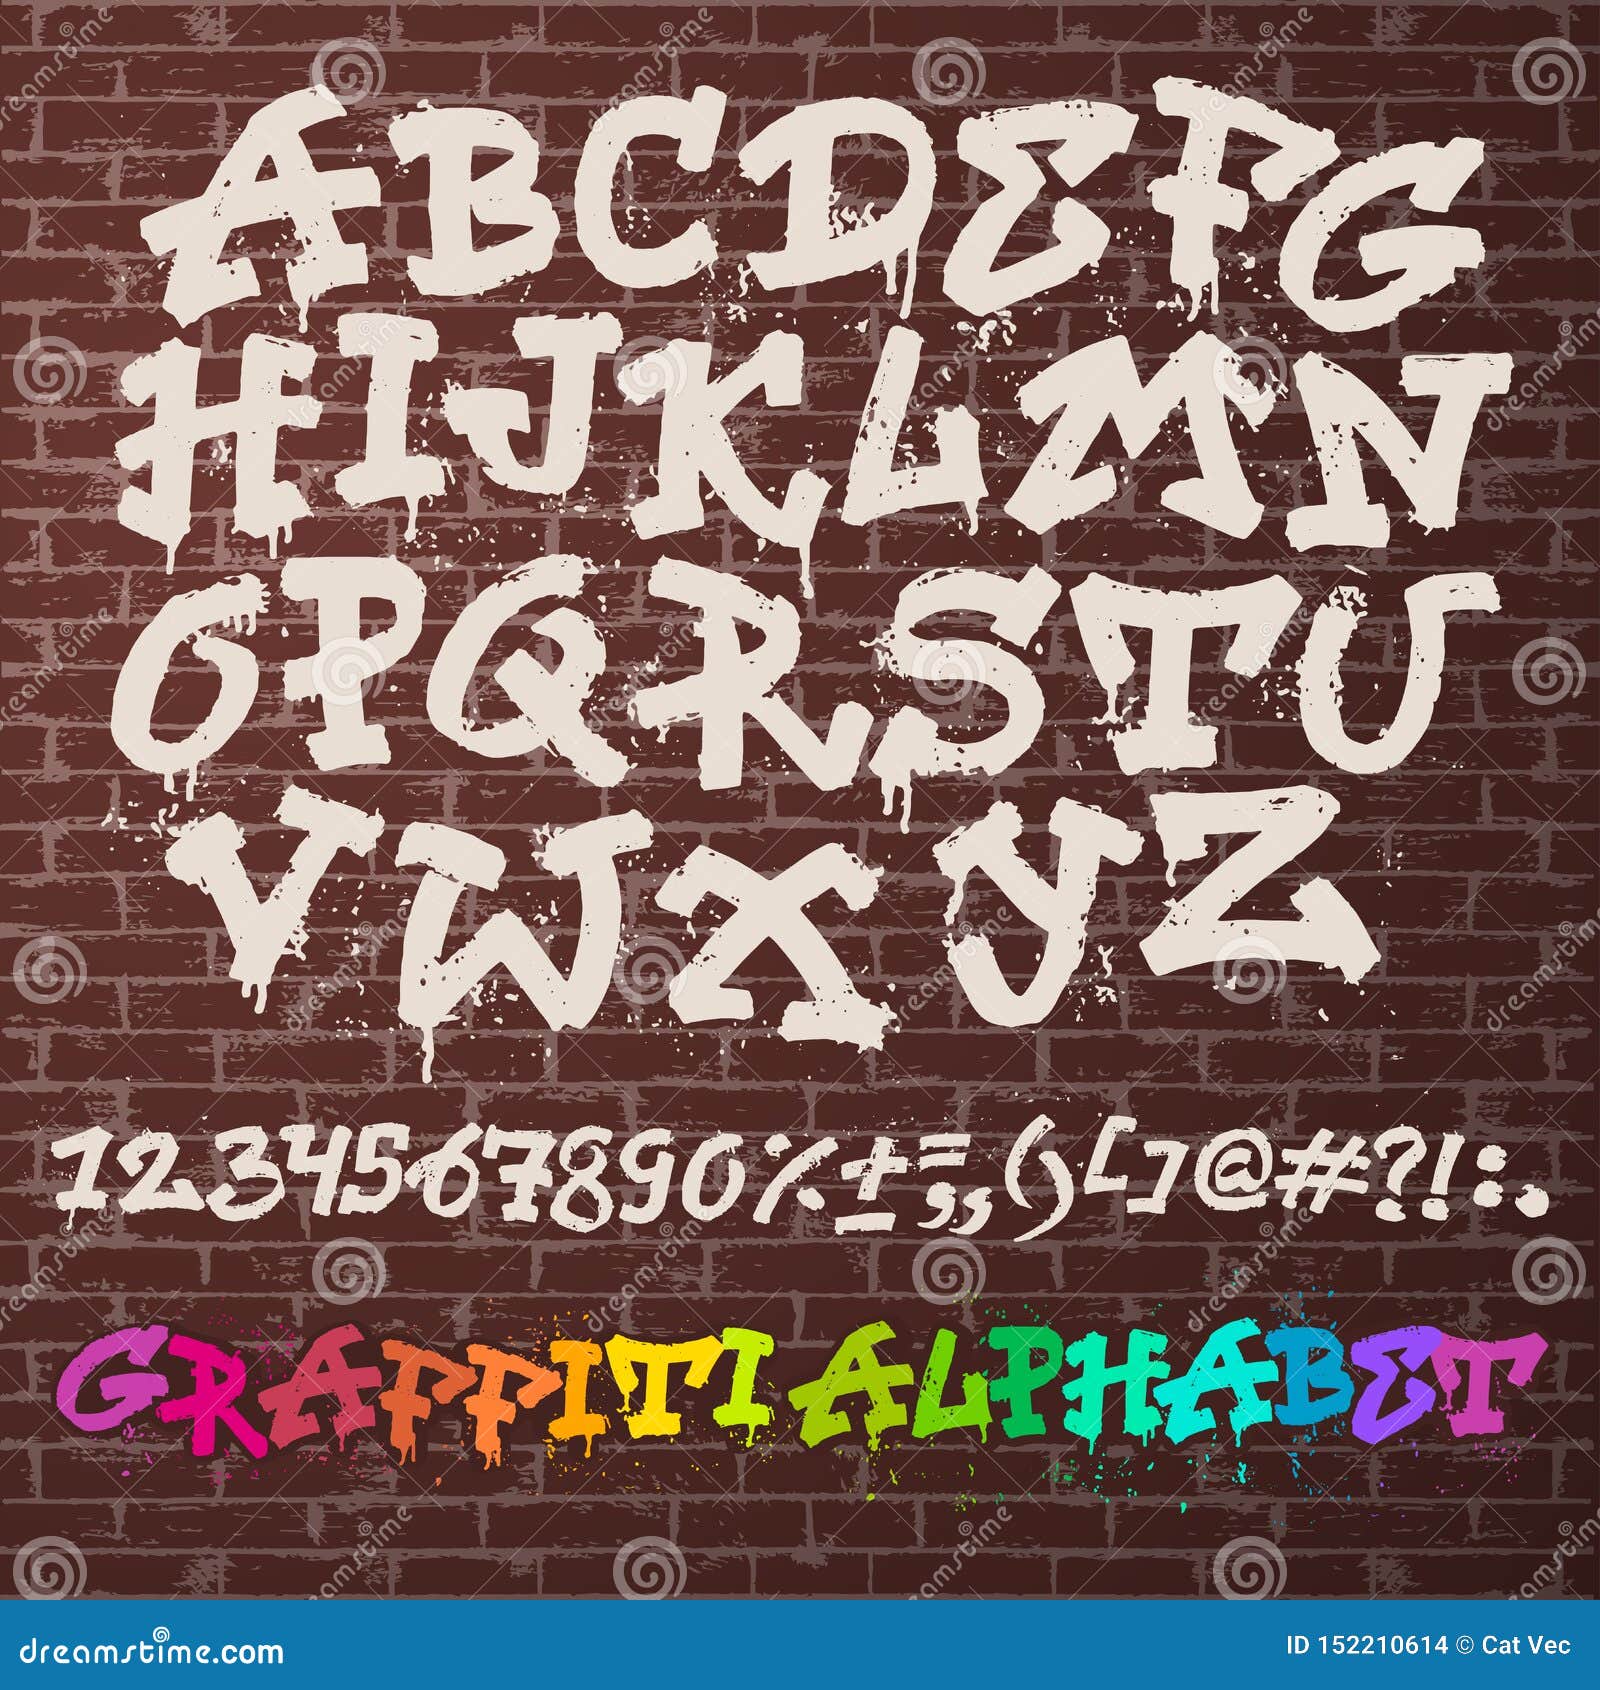 Alphabet Graffity Alphabetical Font Abc By Brush Stroke With Letters